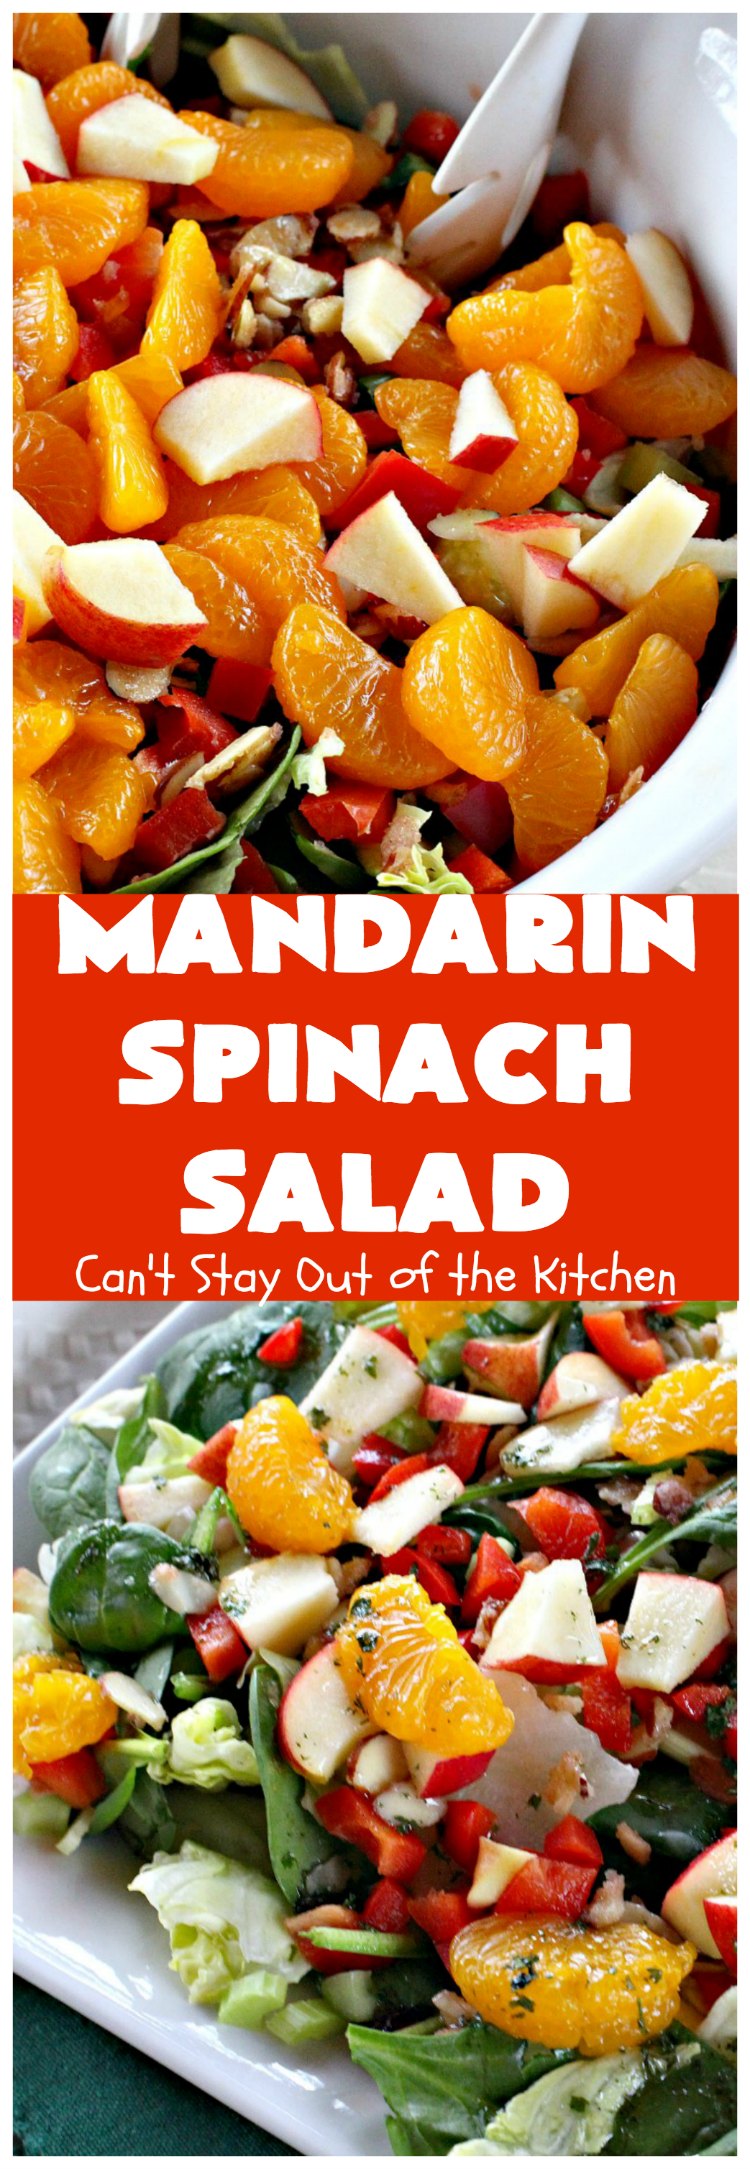 Mandarin Spinach Salad | Can't Stay Out of the Kitchen